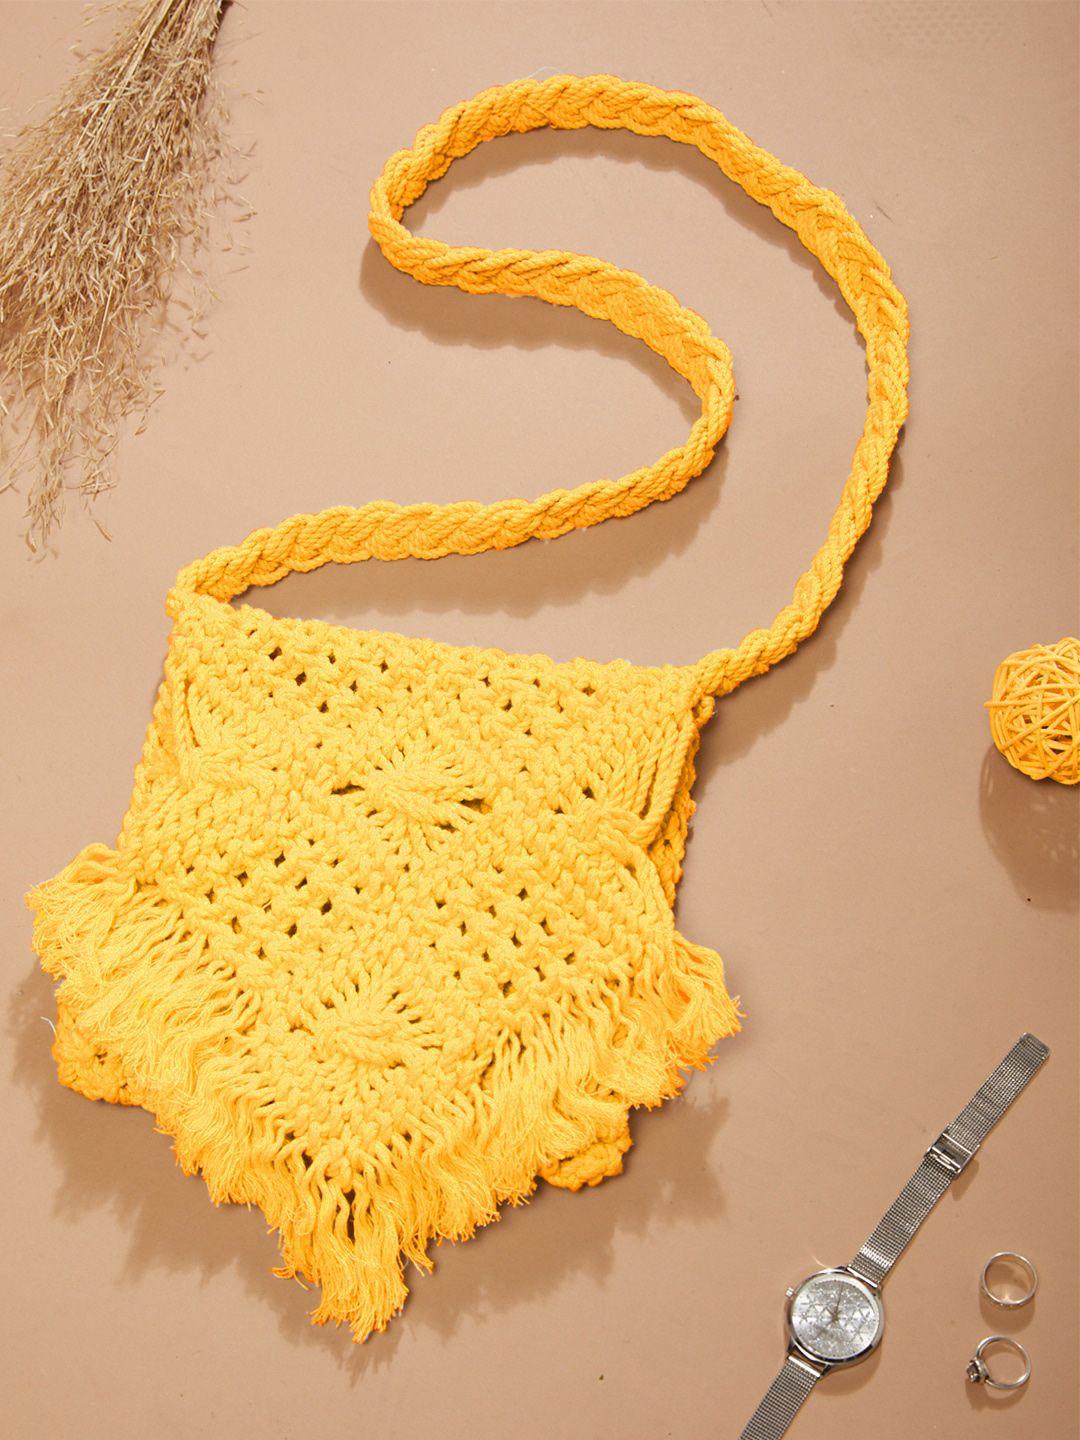 imars structured handheld bag with fringed